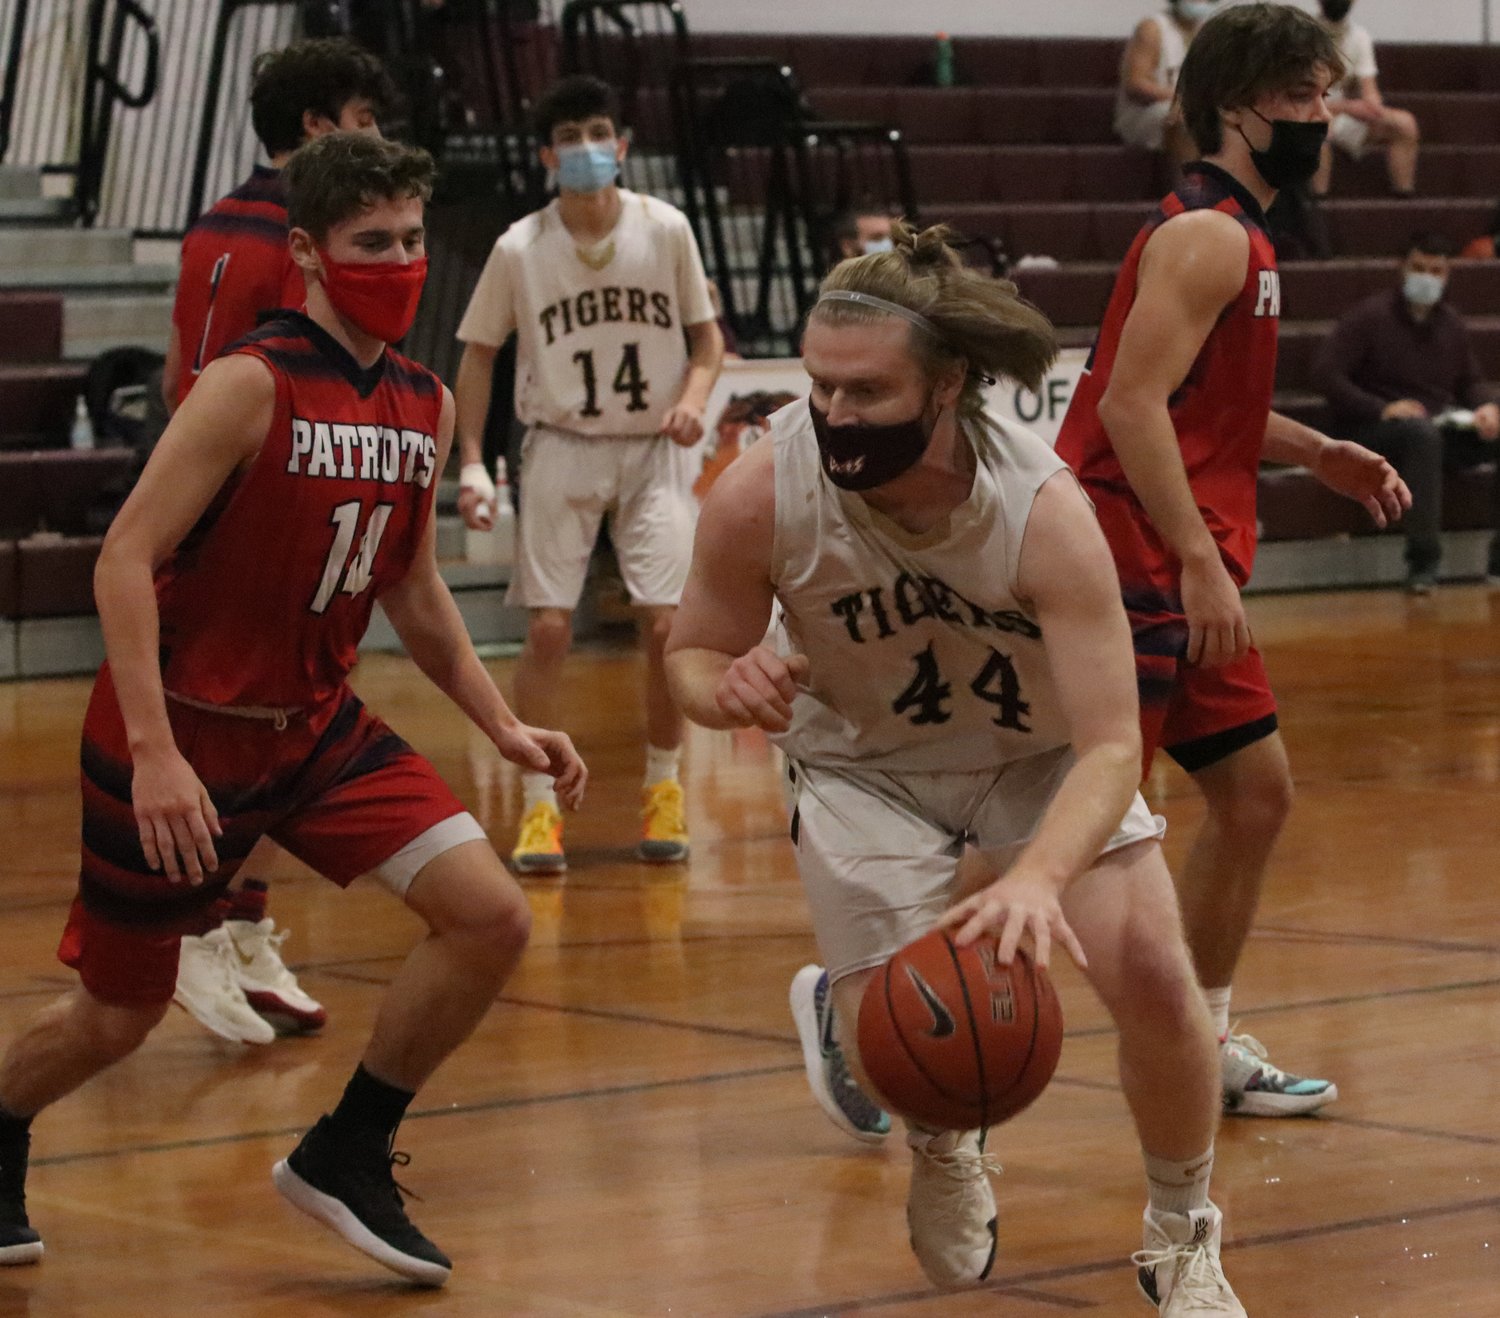 Senior Will Gerlach puts the ball on the floor and makes a move to the inside.